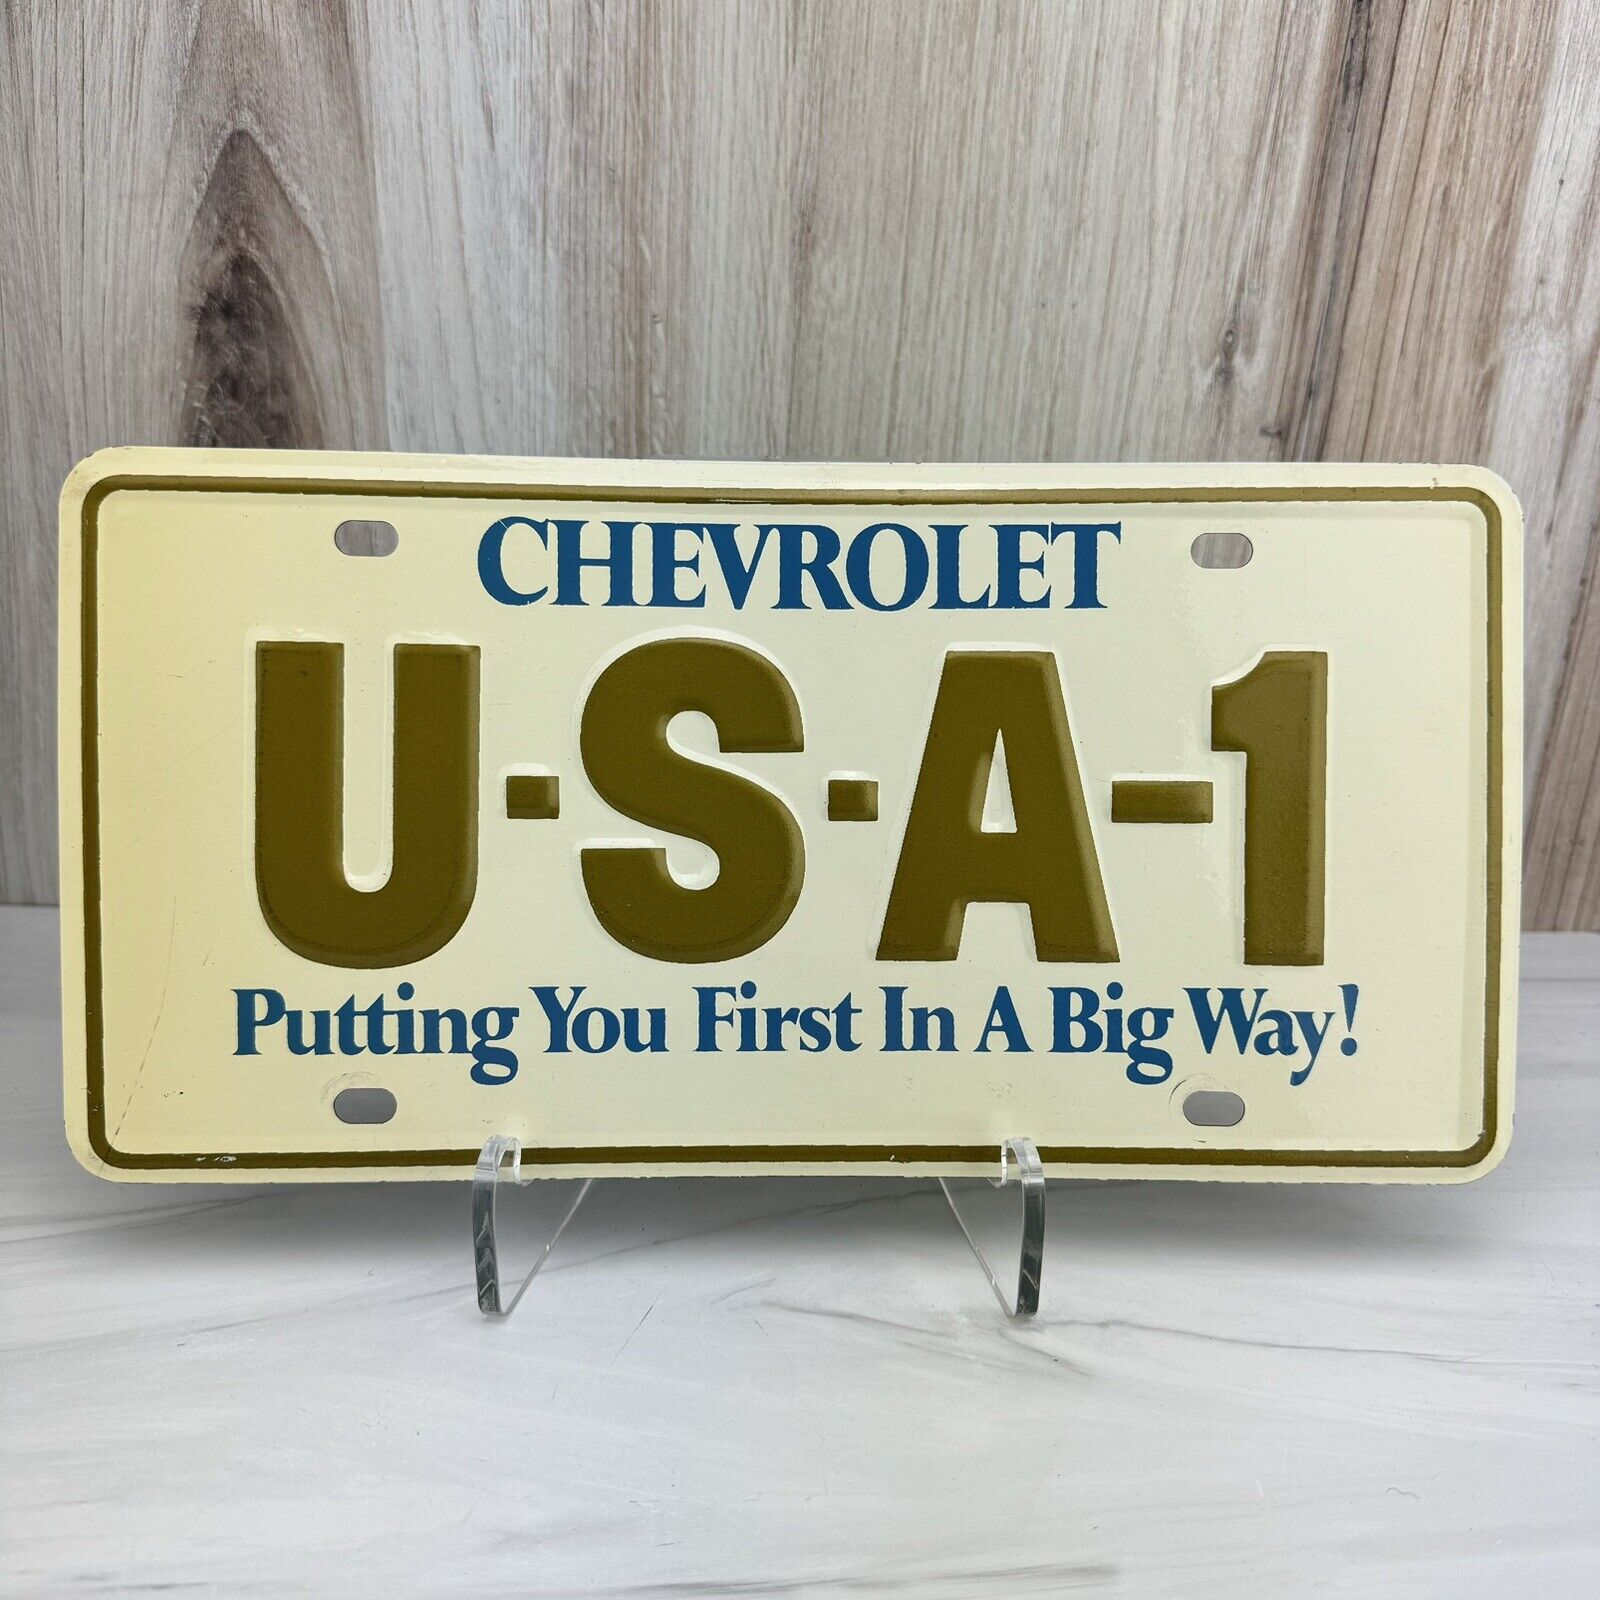 USA 1 Chevrolet Vintage Heavy Steel License Plate Putting You First in a Big Way